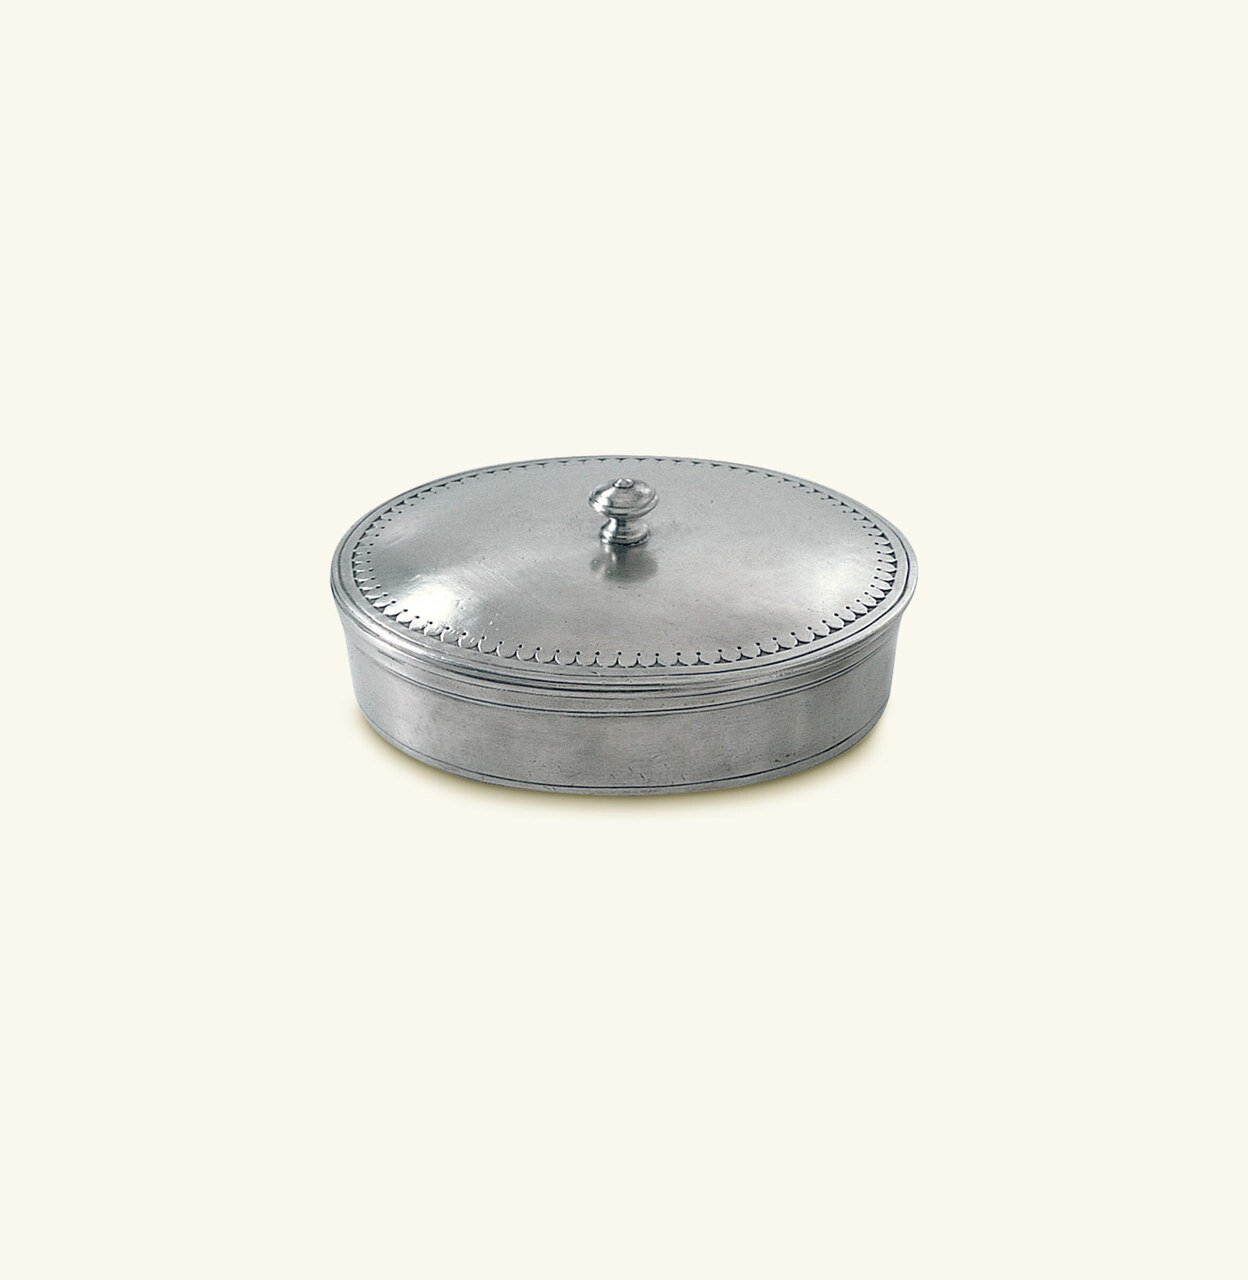 Match Pewter Oval Lidded Box Large a617.0